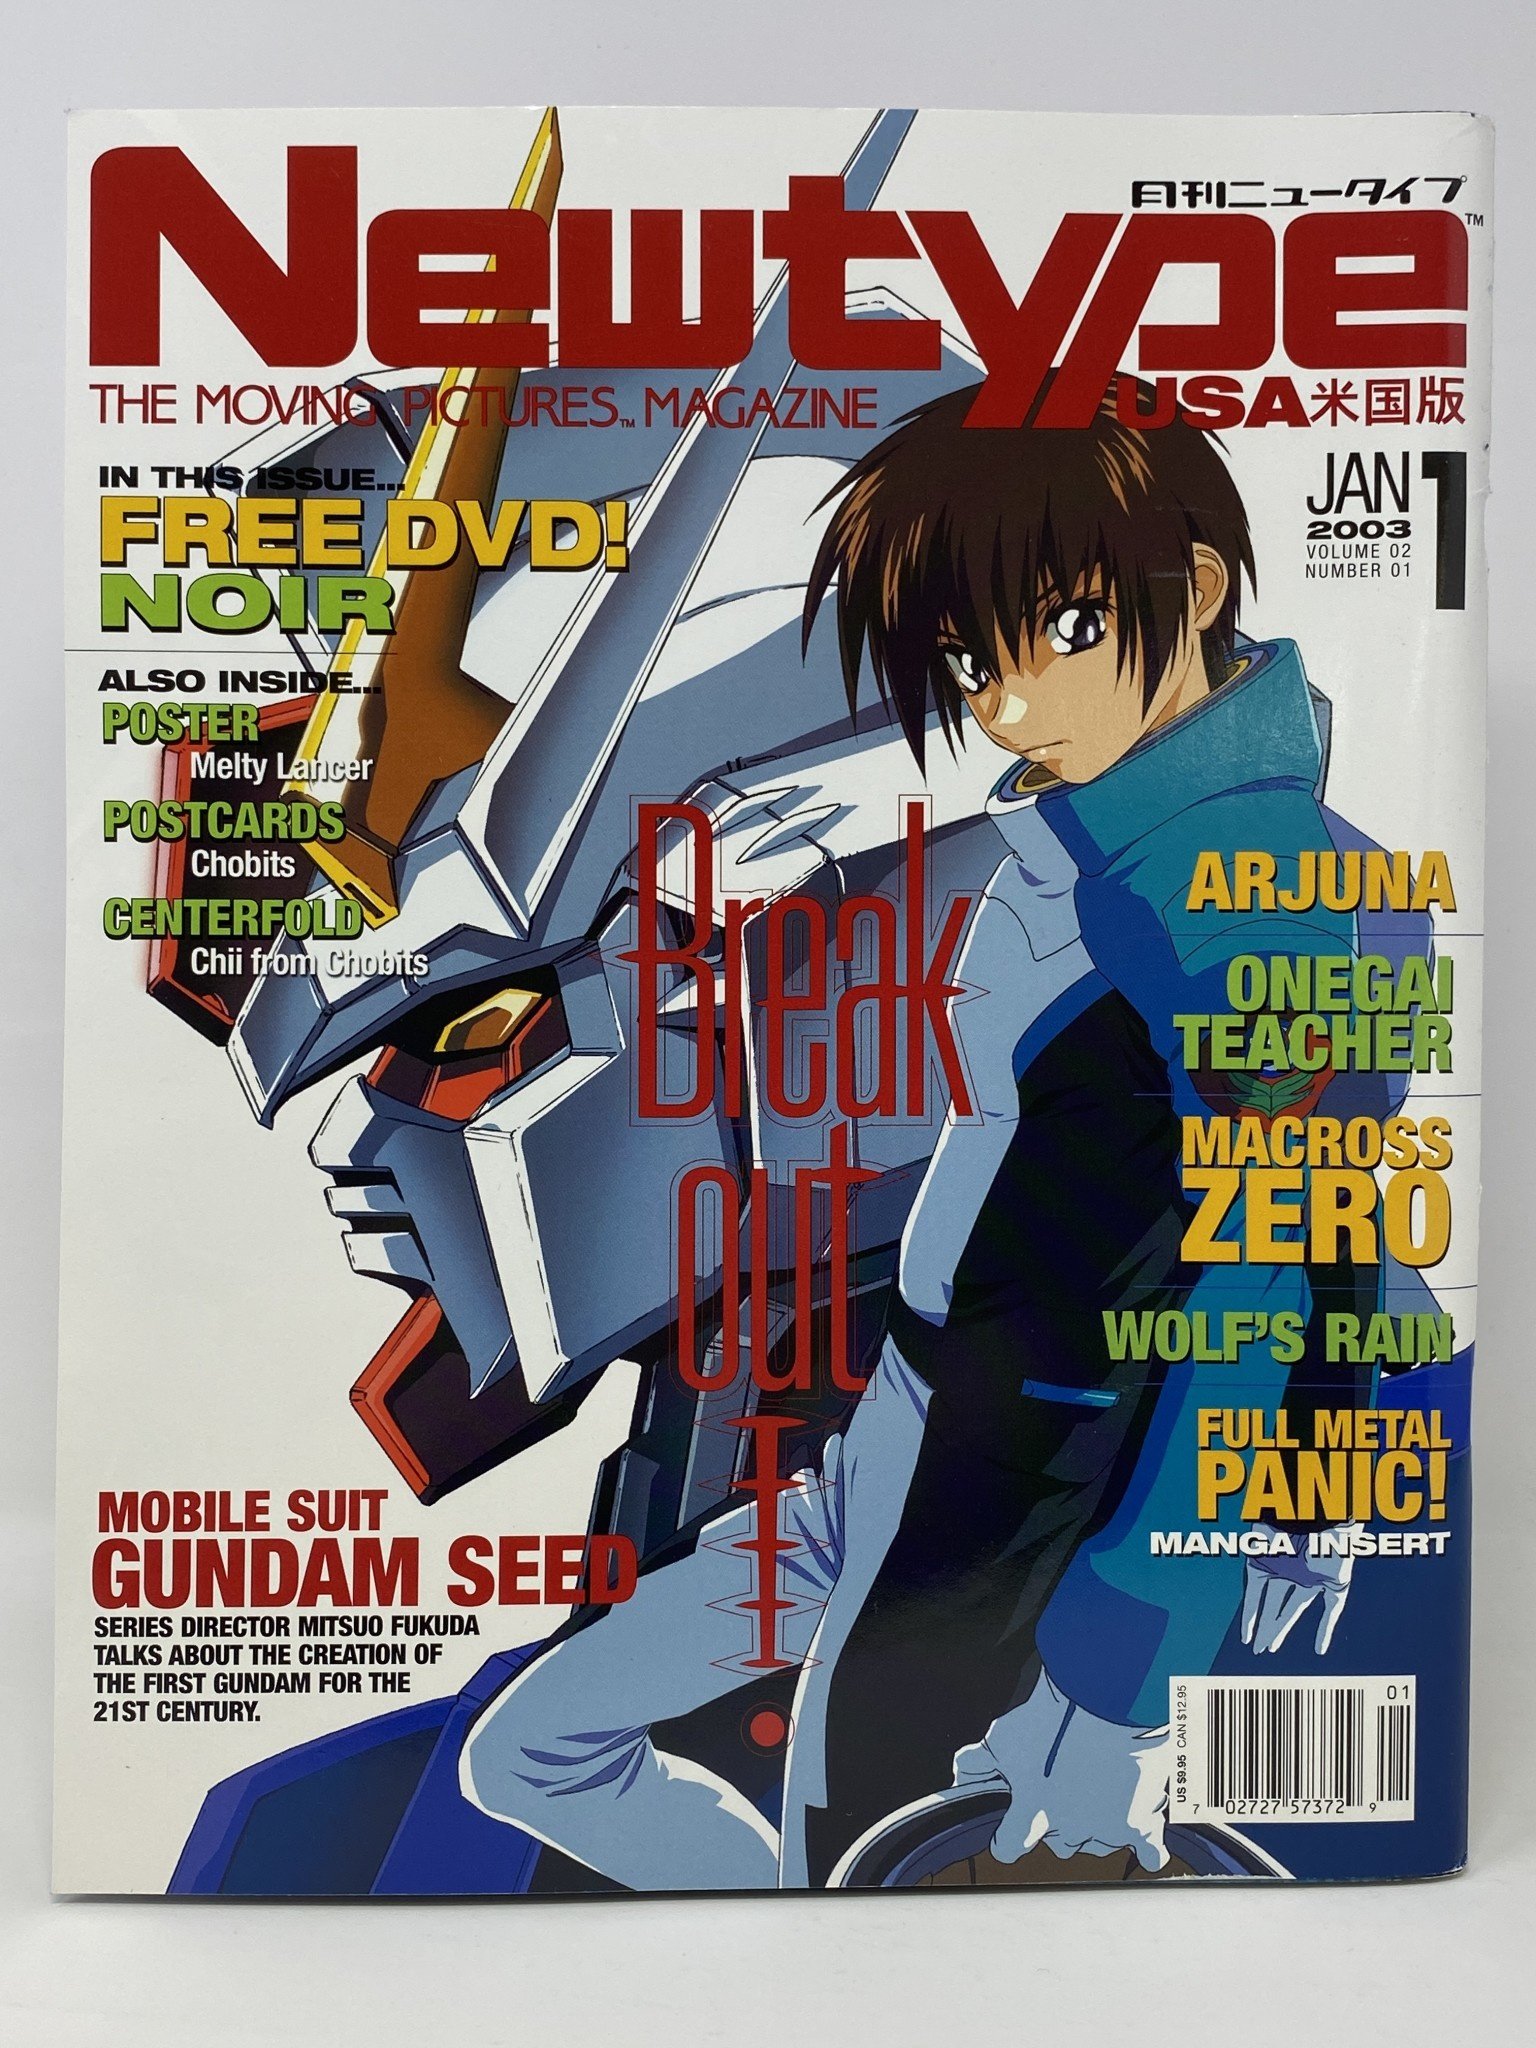 Read Anime Cult magazine on Readly - the ultimate magazine subscription.  1000's of magazines in one app